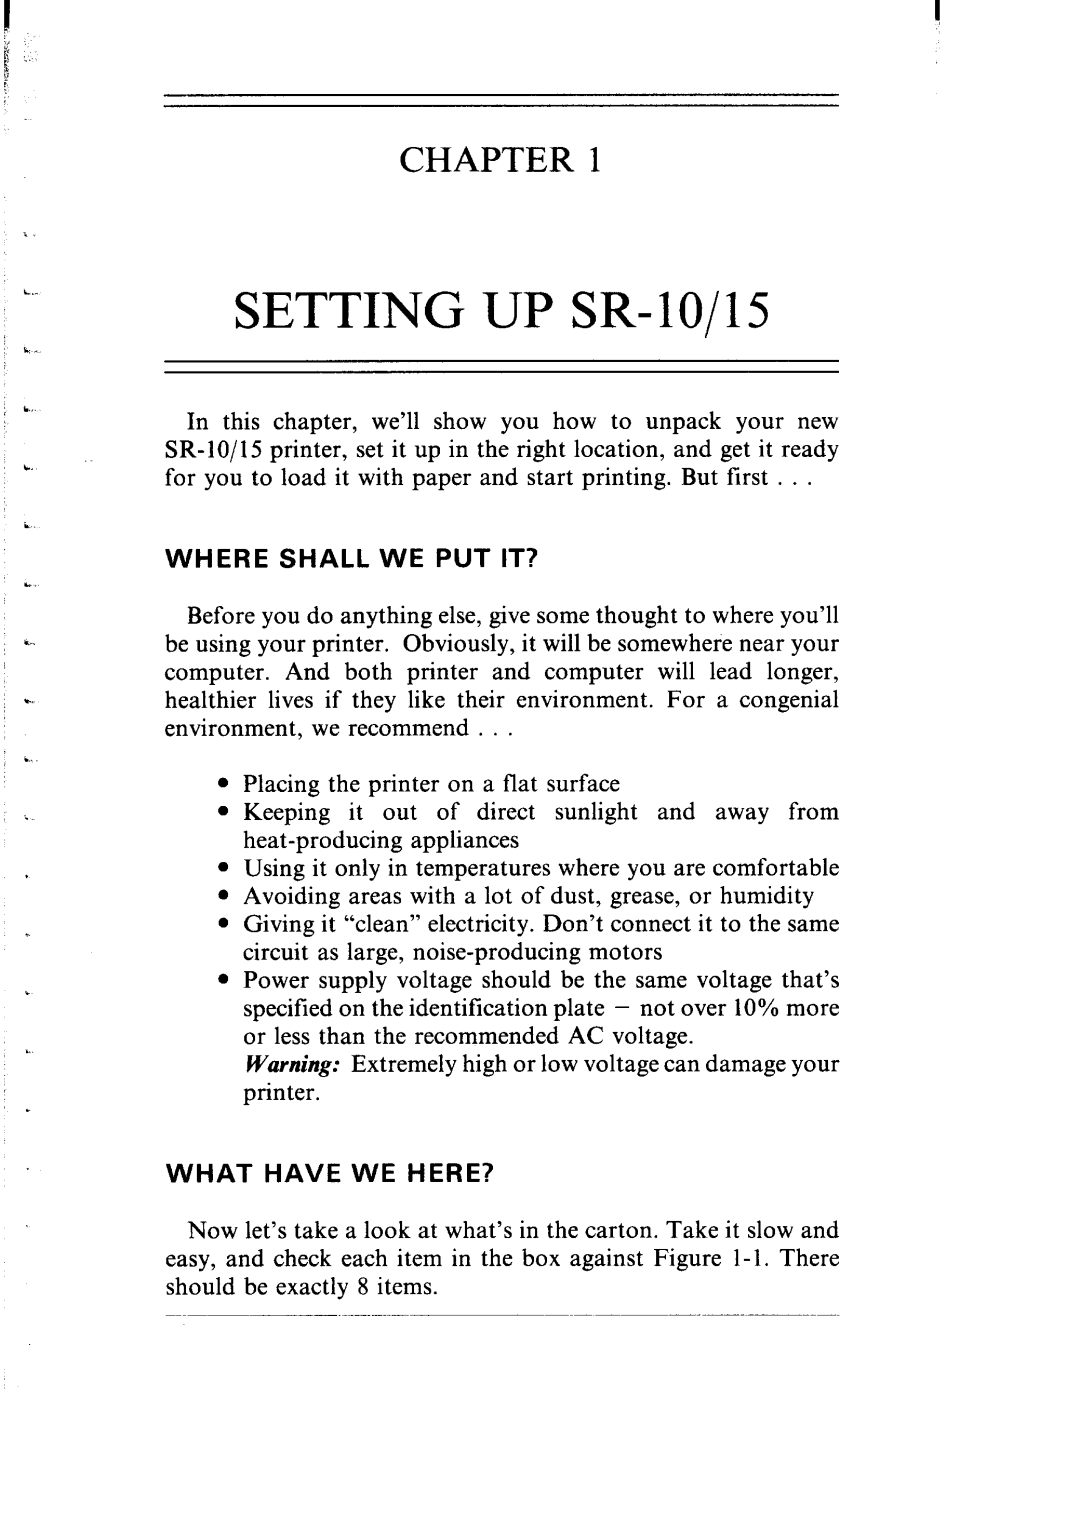 Star Micronics SR-10/I5 user manual SETTING UP SR- 1O/15, Chapter, Where Shall We Put It?, What Have We Here? 